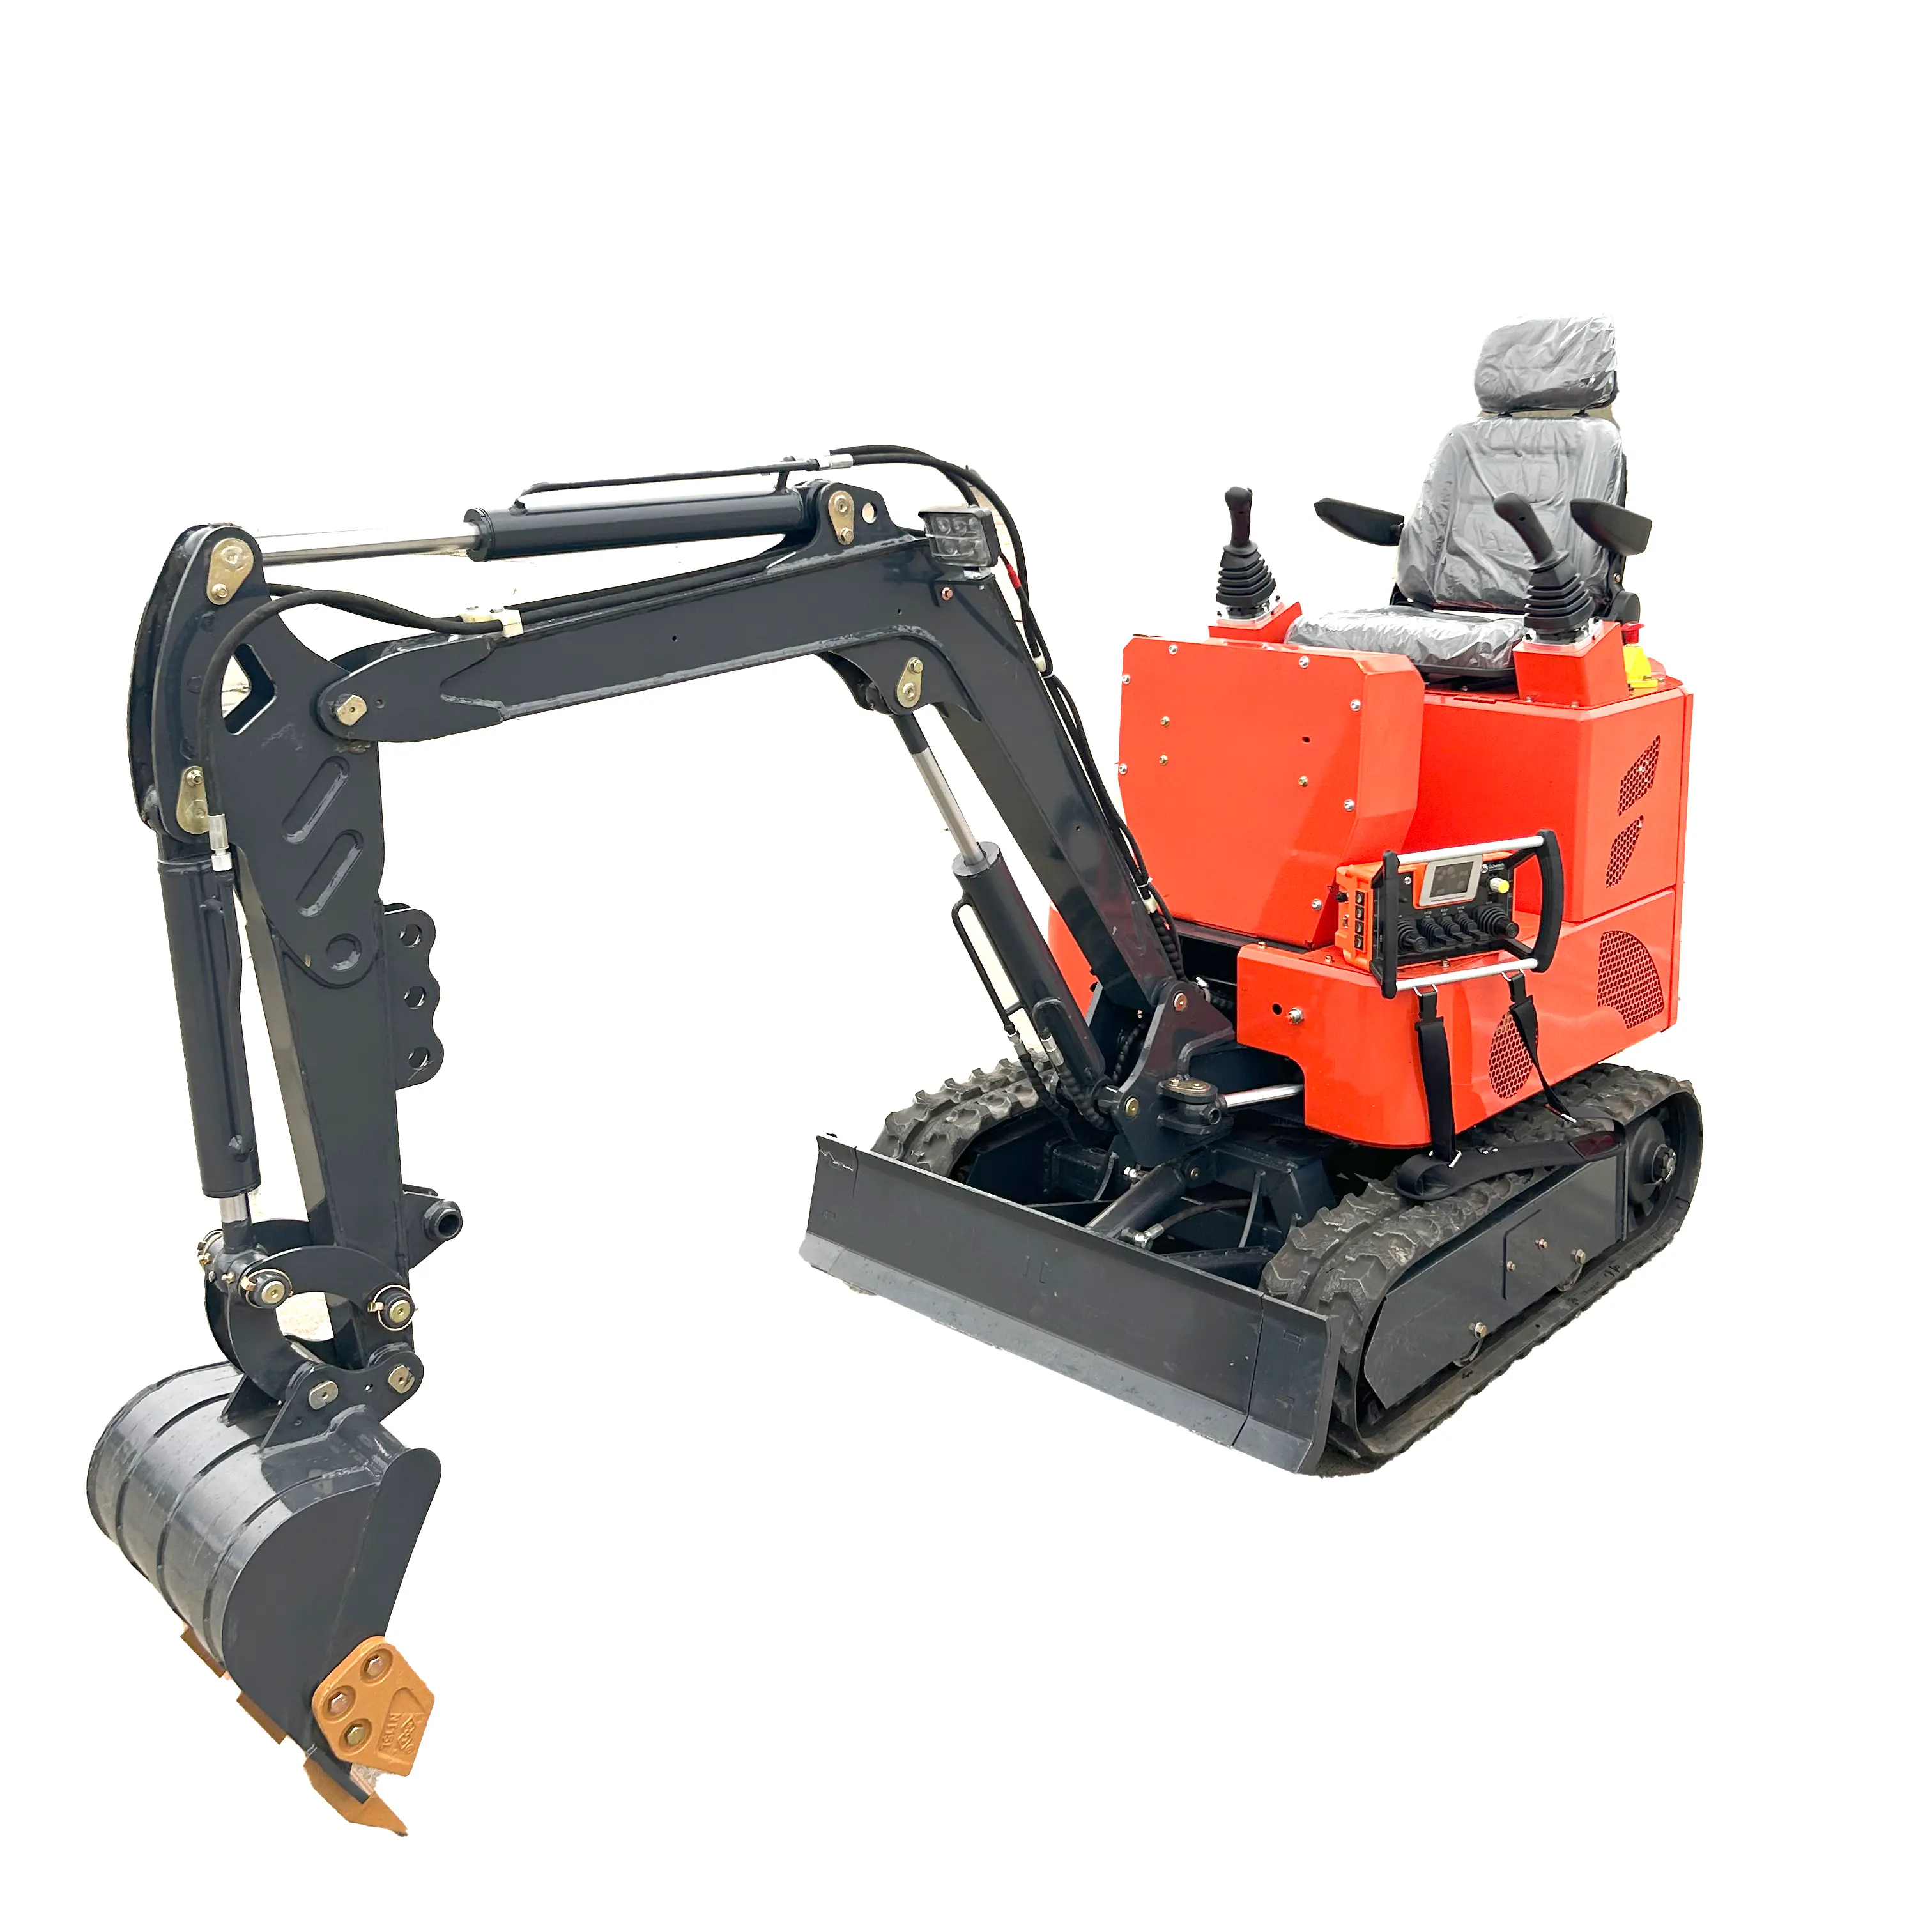 Not toy for children but real remote control mini excavator electric excavator used for home/garden/construction machines